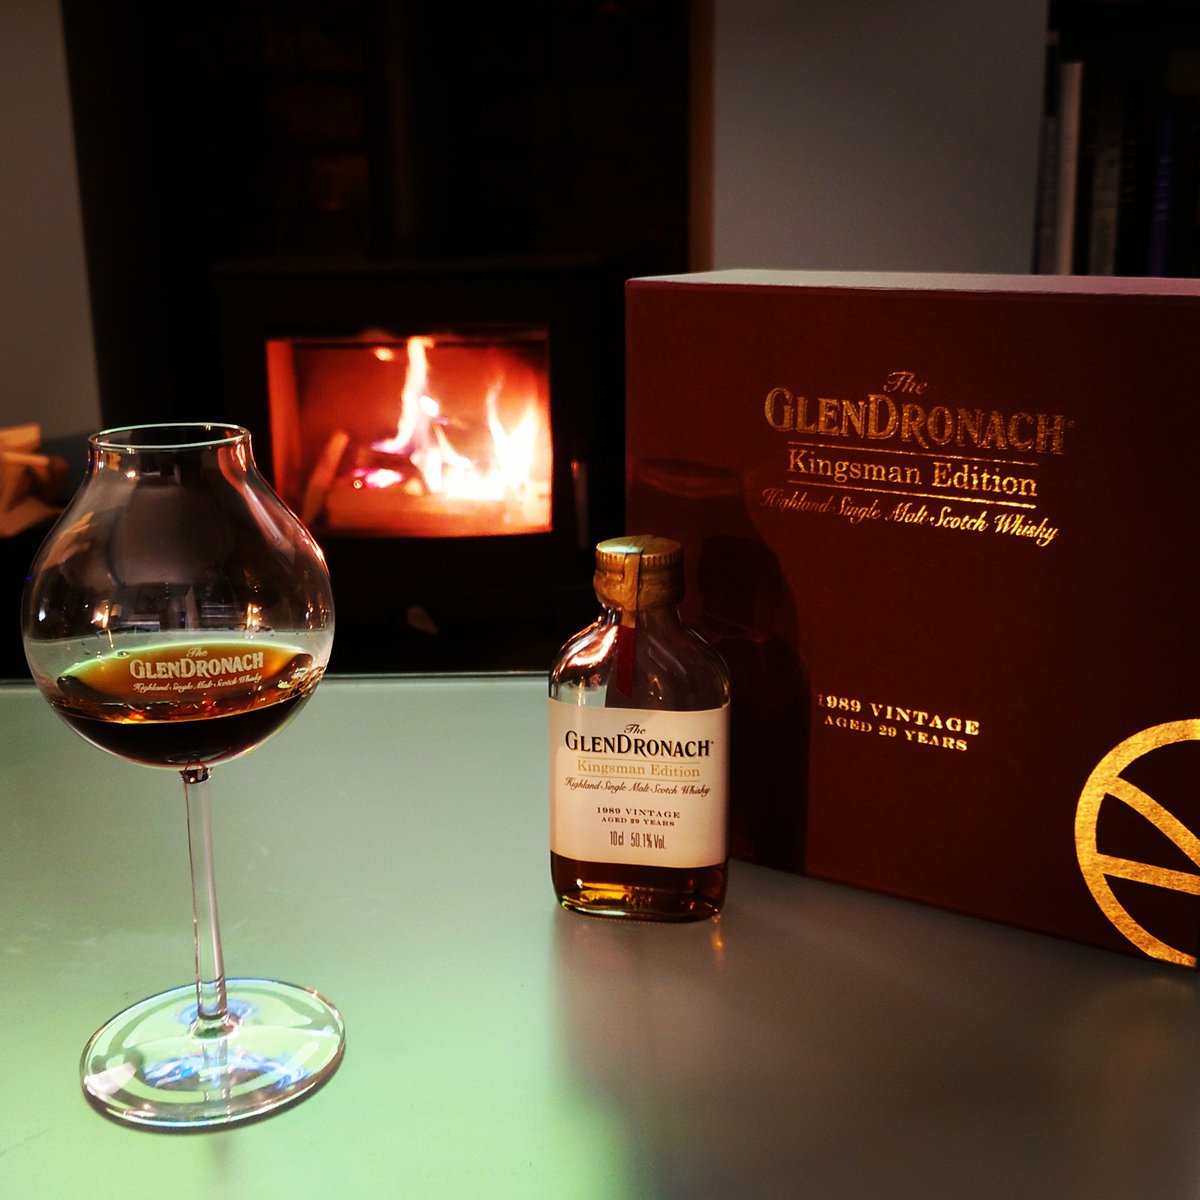 Scotland, my auld, respected mither! Tho' whiles ye moistify your leather, Till, whare ye sit on craps o' heather, Ye tine your dam; Freedom an' whisky gang thegither! Take aff your dram! Raising this dram of @Glendronach 29YO to all my friends on this #BurnsNight 2023 🥃